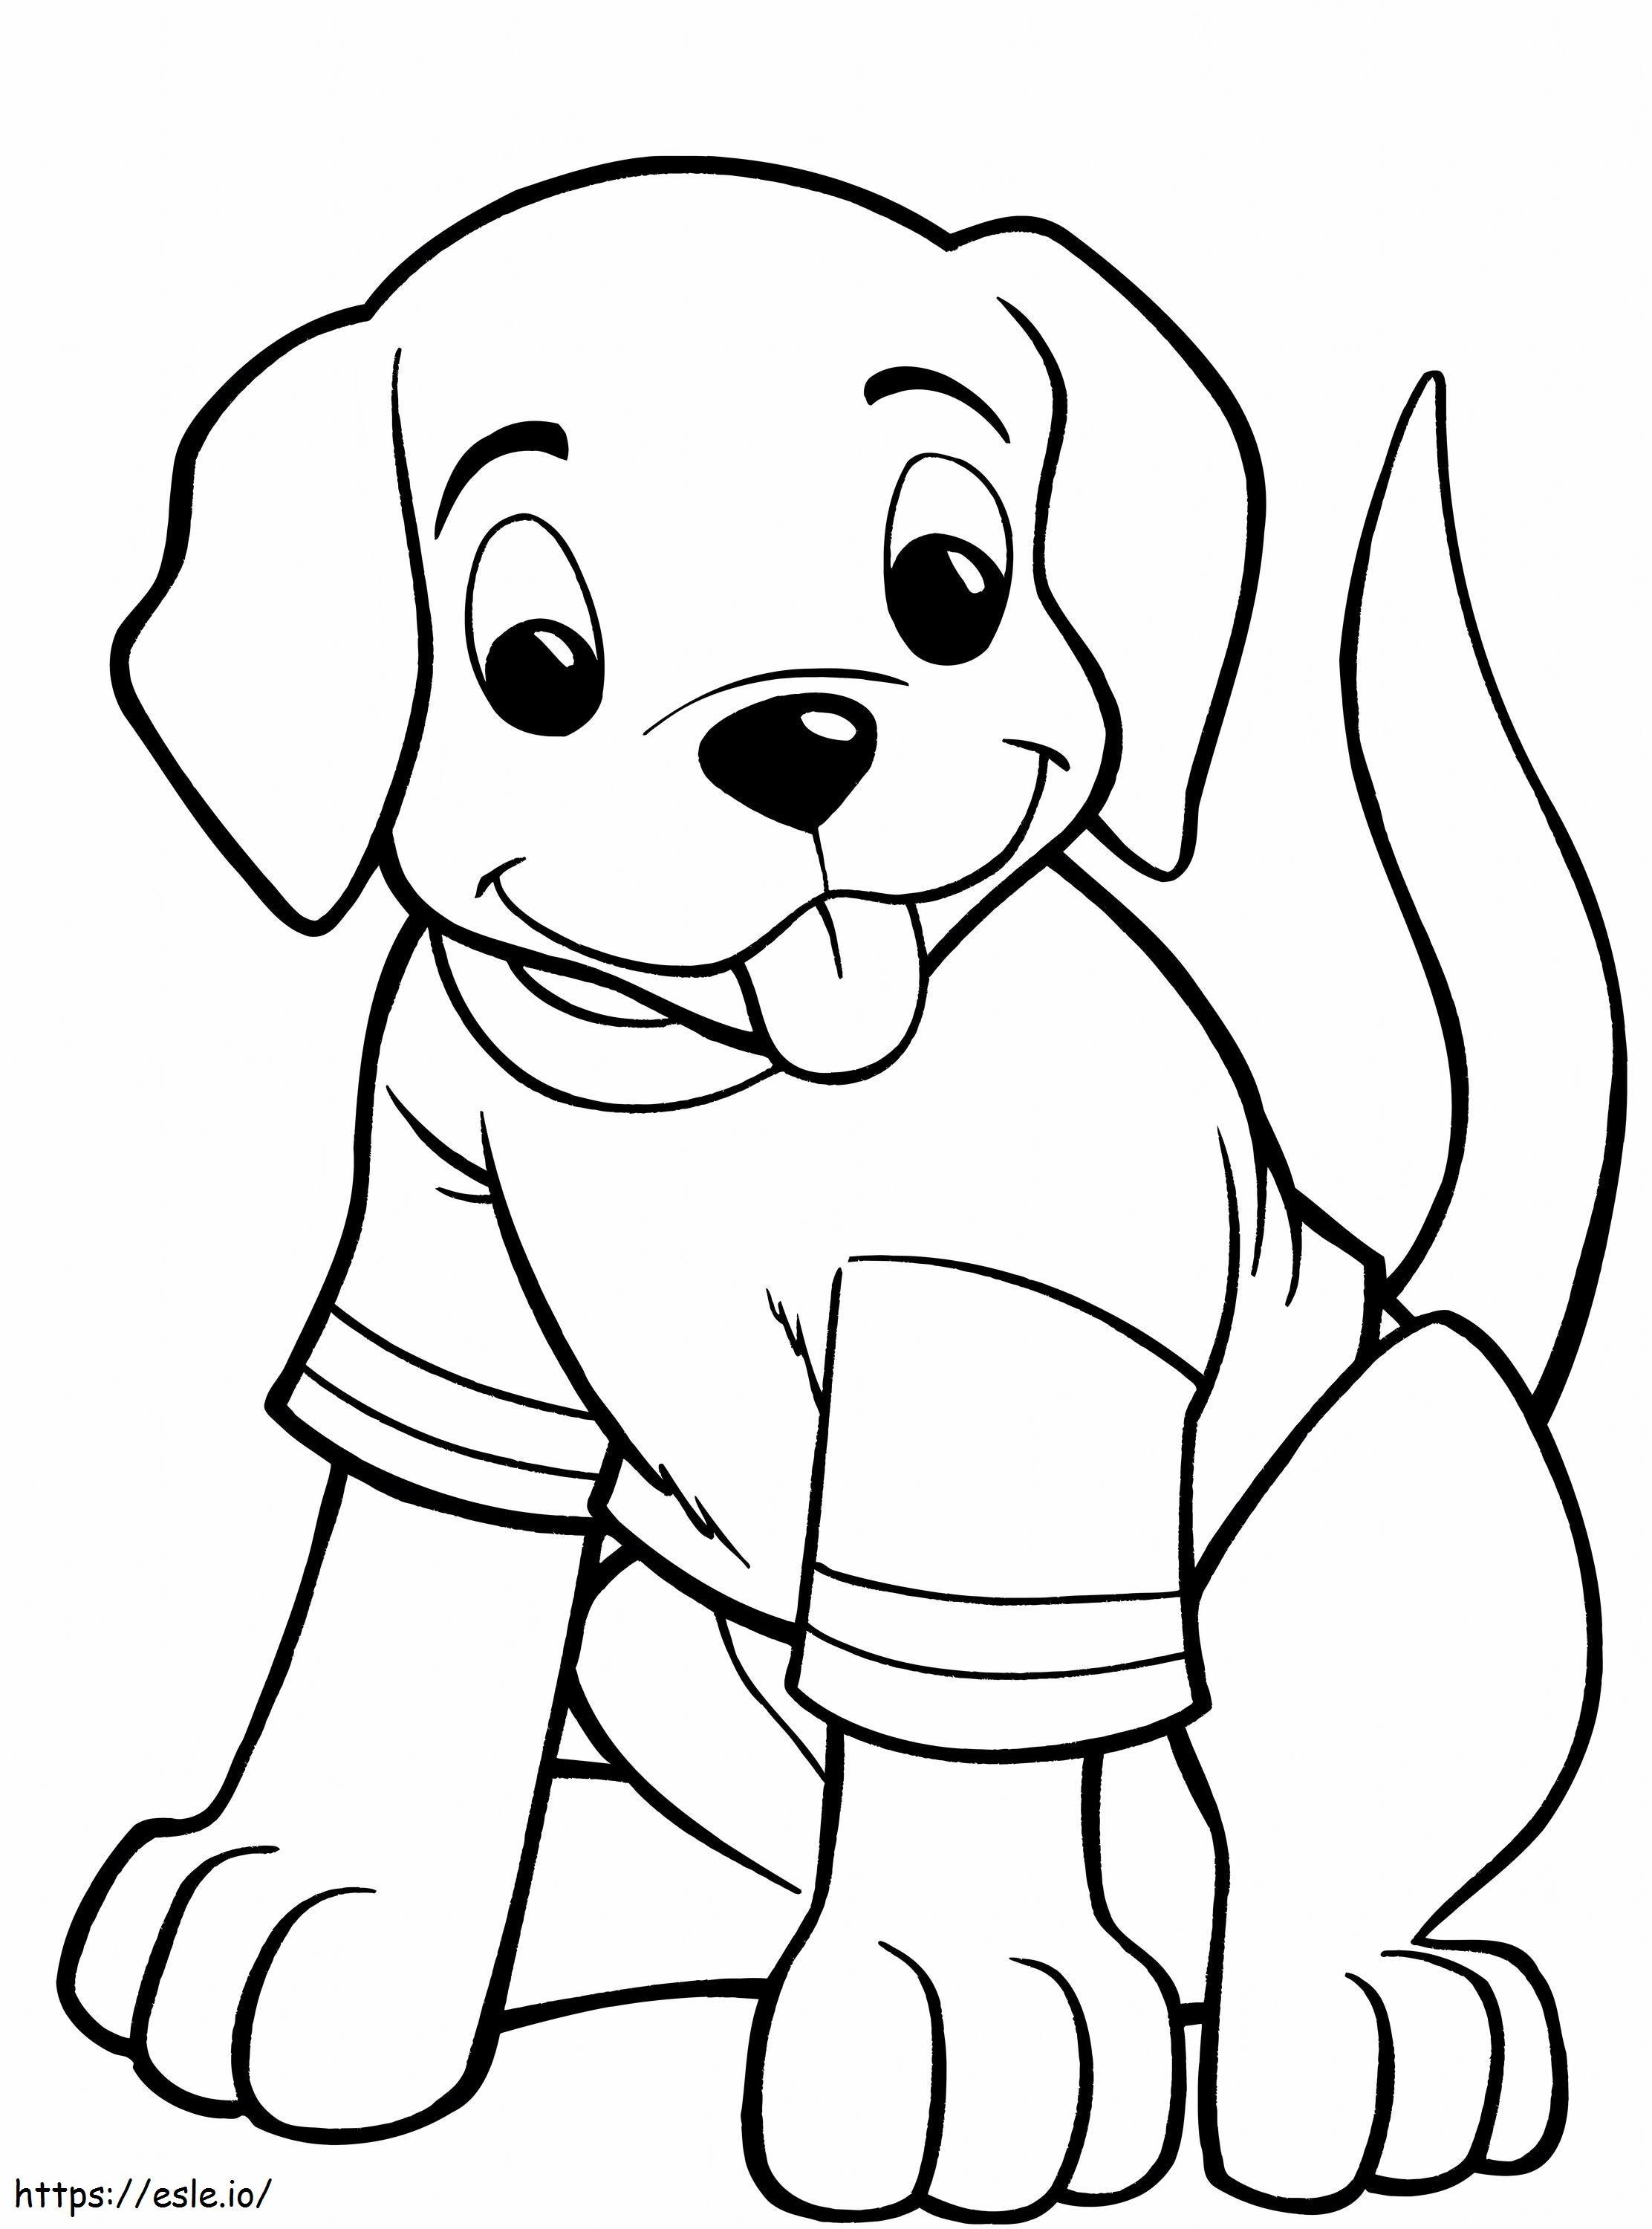 _Useful Cute Cartoon Puppy Unique Print Pictures To Through Puppies Sheet Scaled para colorear